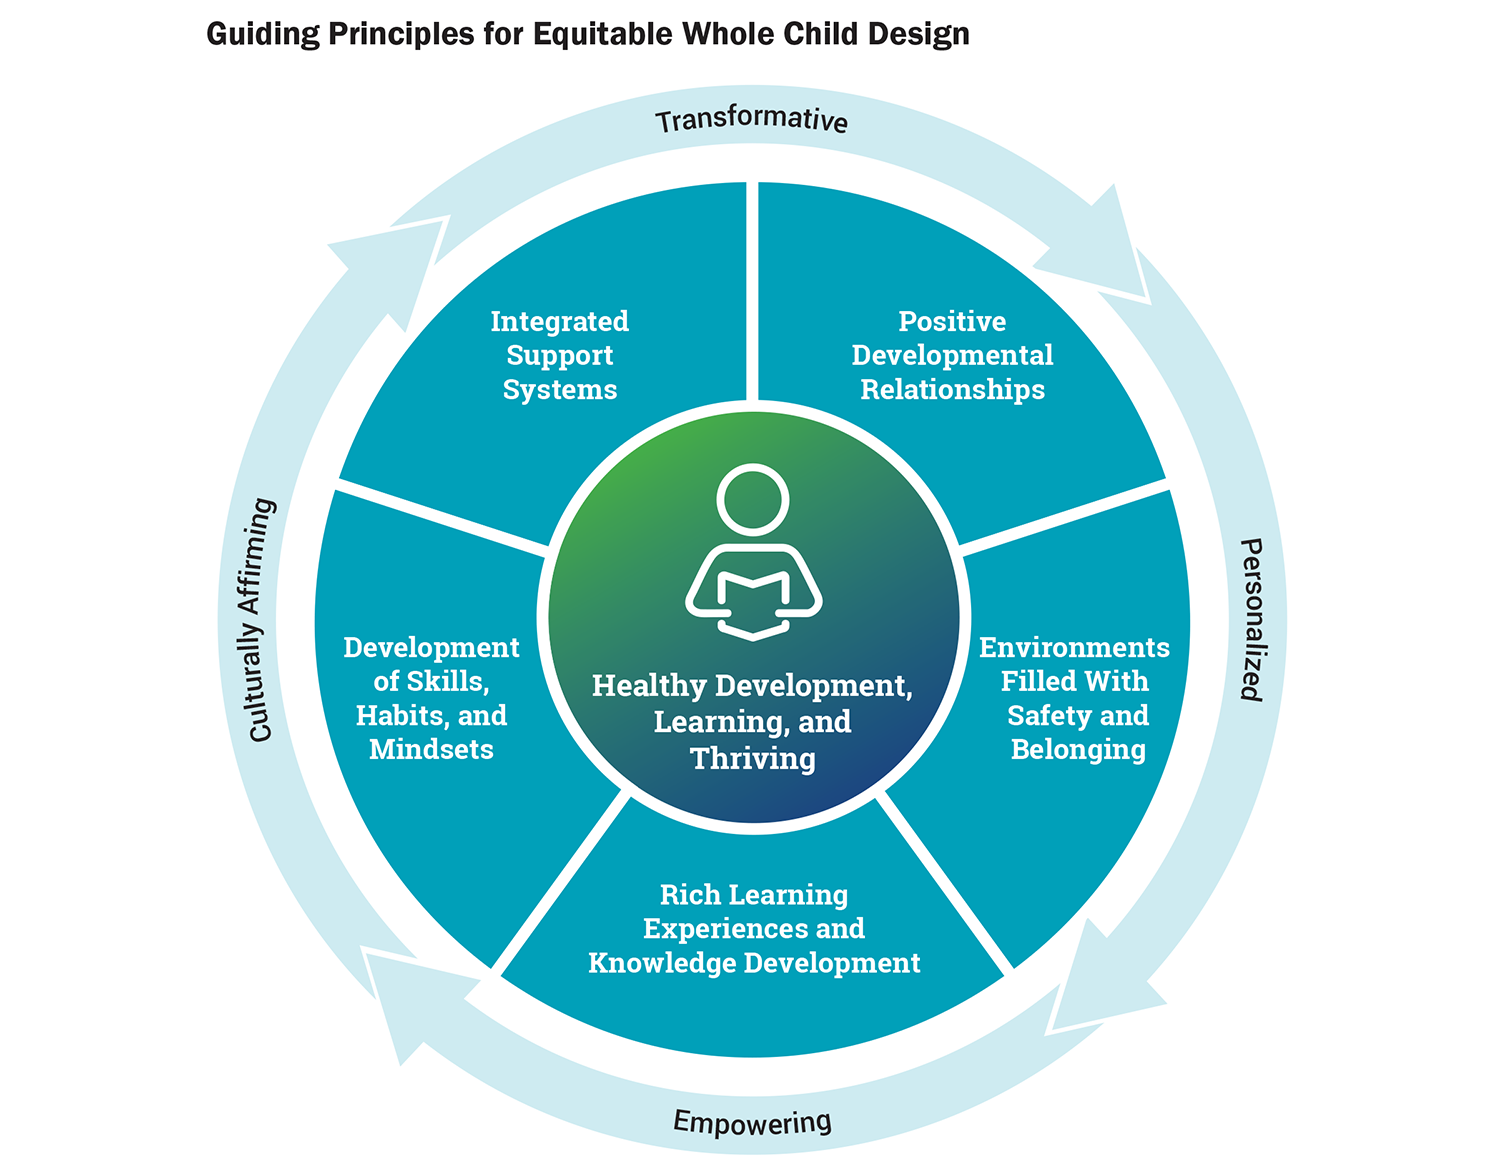 Guiding Principles for Equitable Whole Child Design